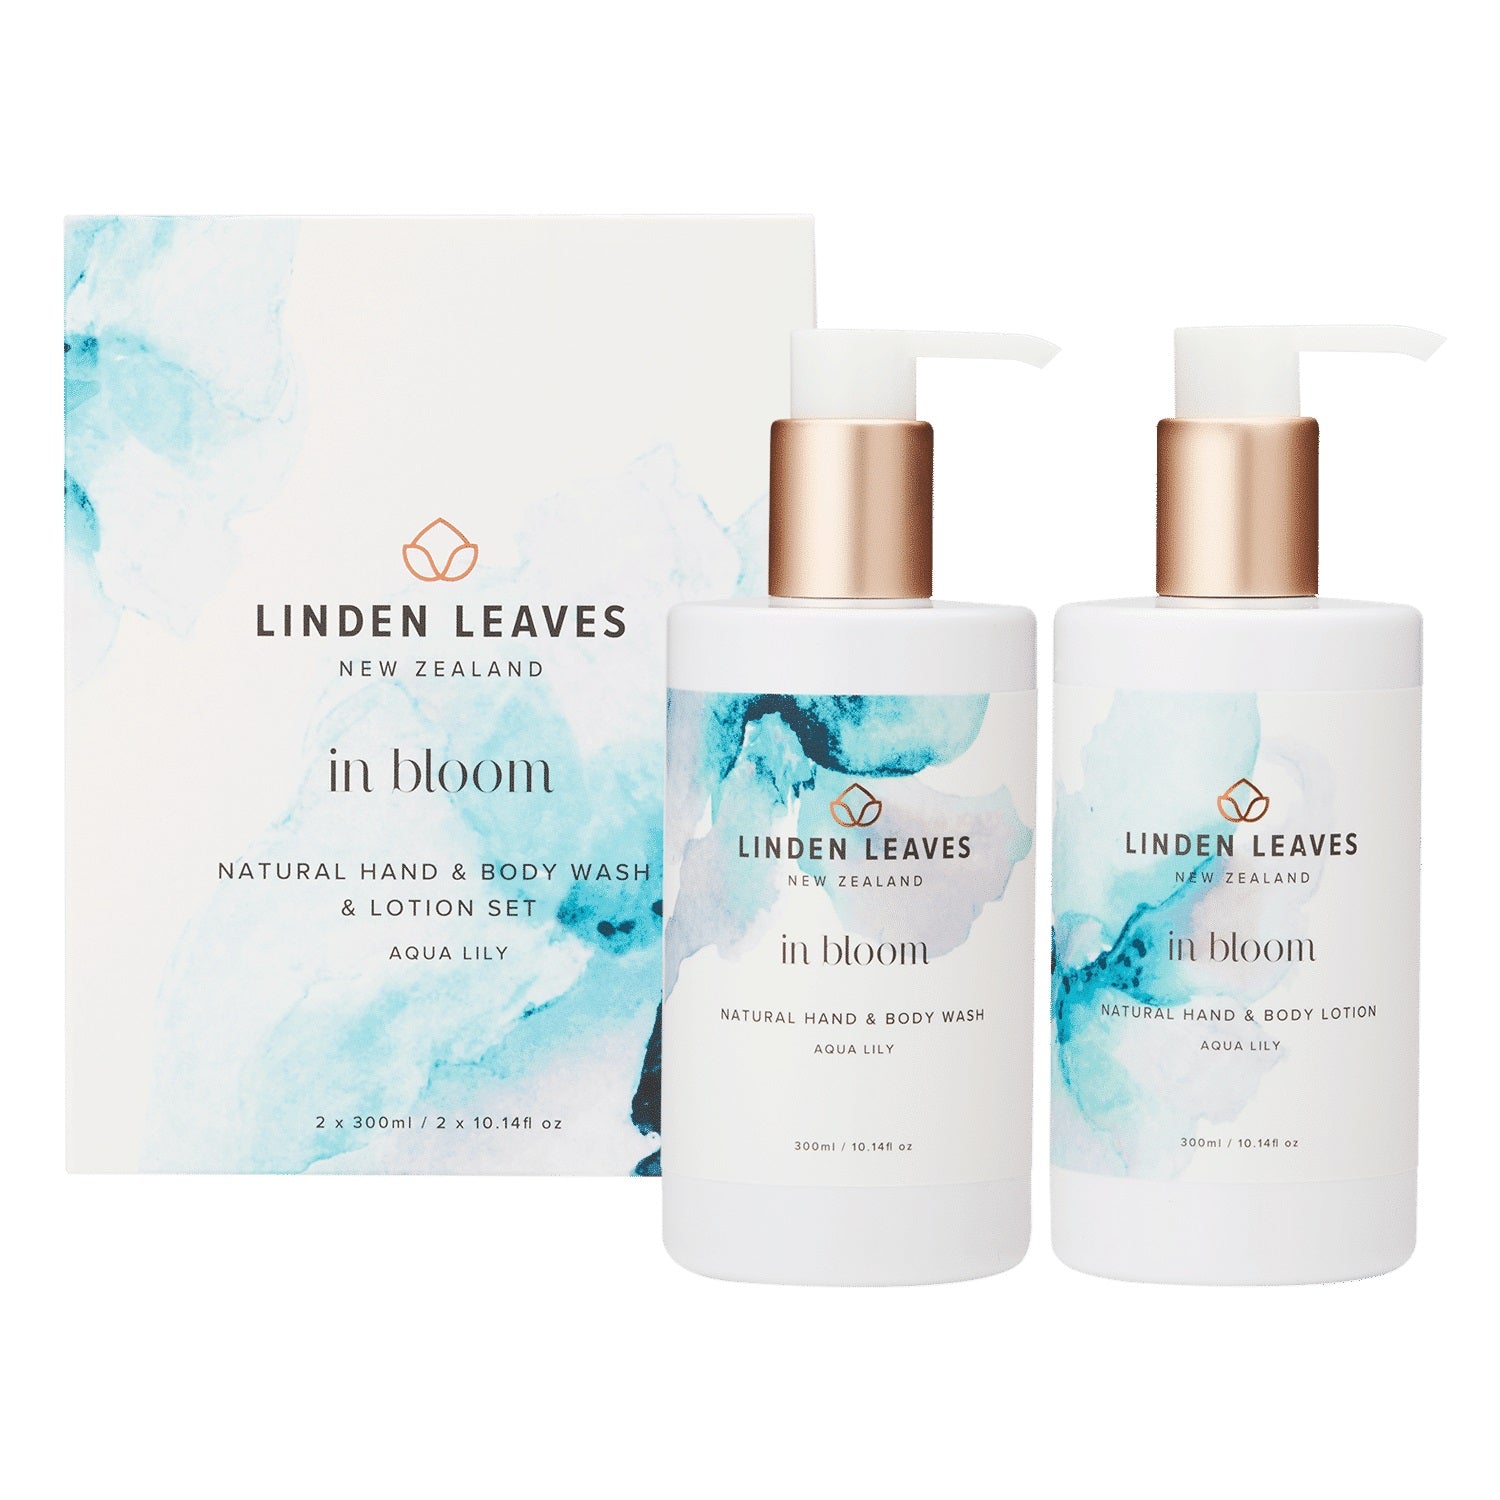 Linden Leaves Aqua Lily Hand & Body Wash & Lotion Boxed Set.